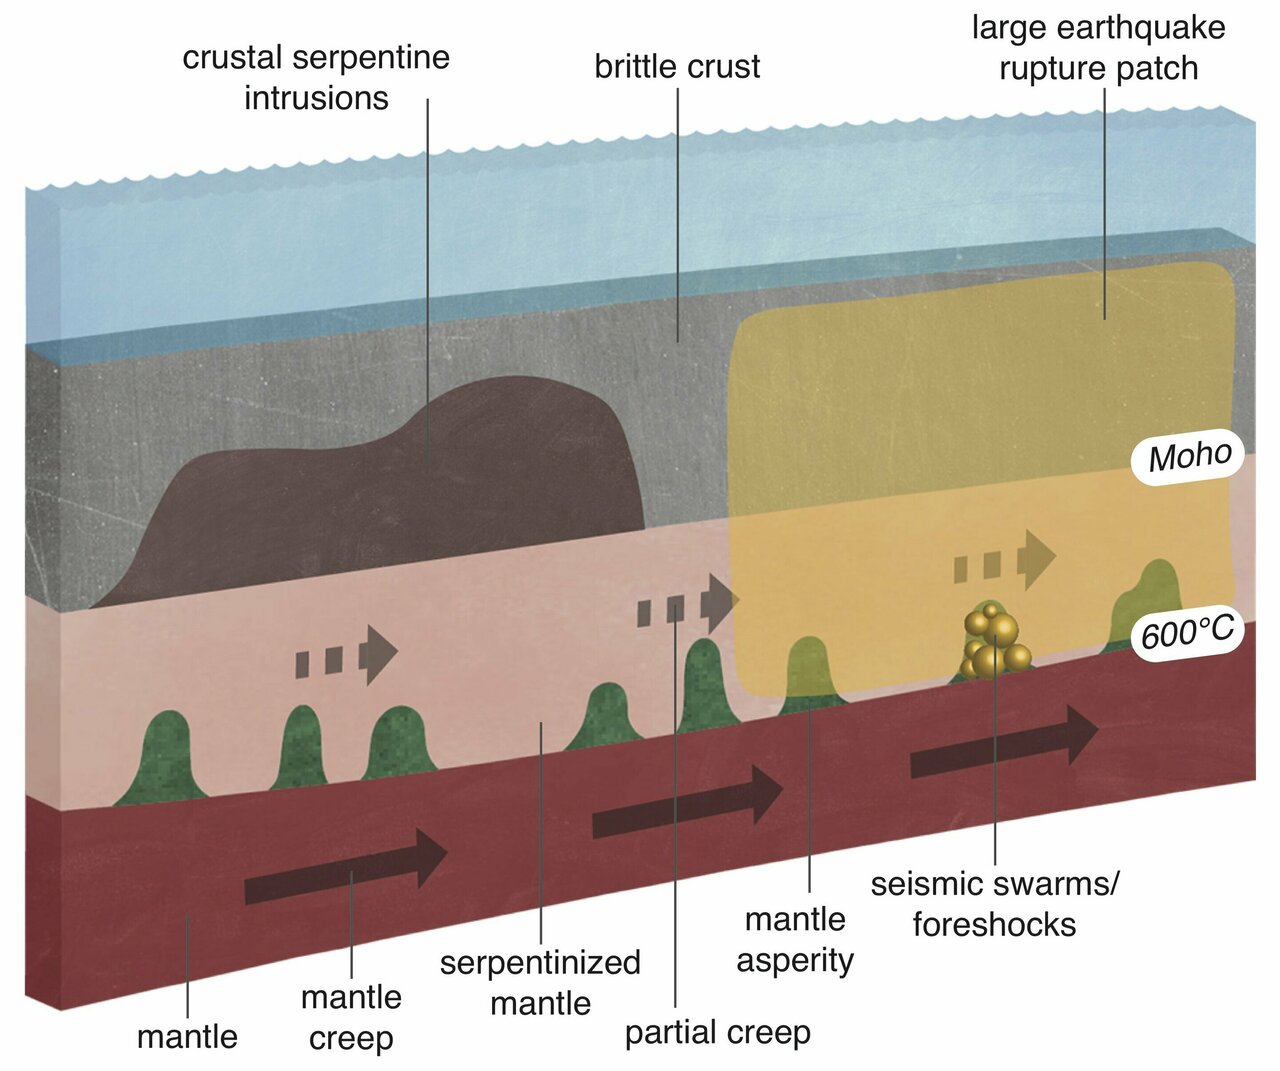 Silent slip' along fault line serves as prelude to big earthquakes, research  suggests